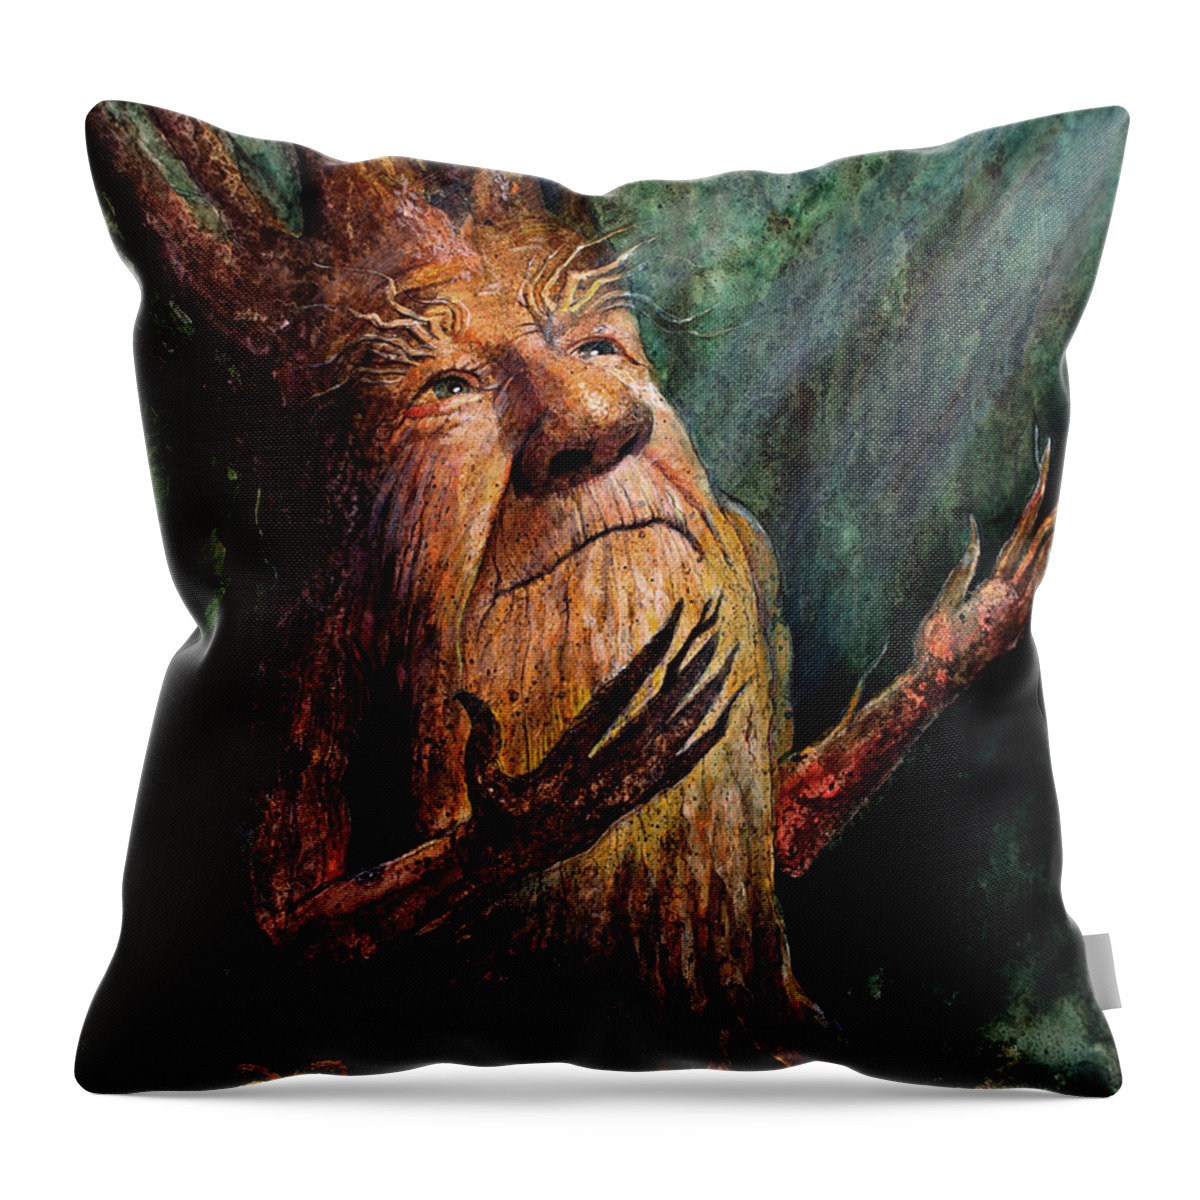 Trees With Faces Throw Pillow featuring the painting Looking To the Light by Frank Robert Dixon